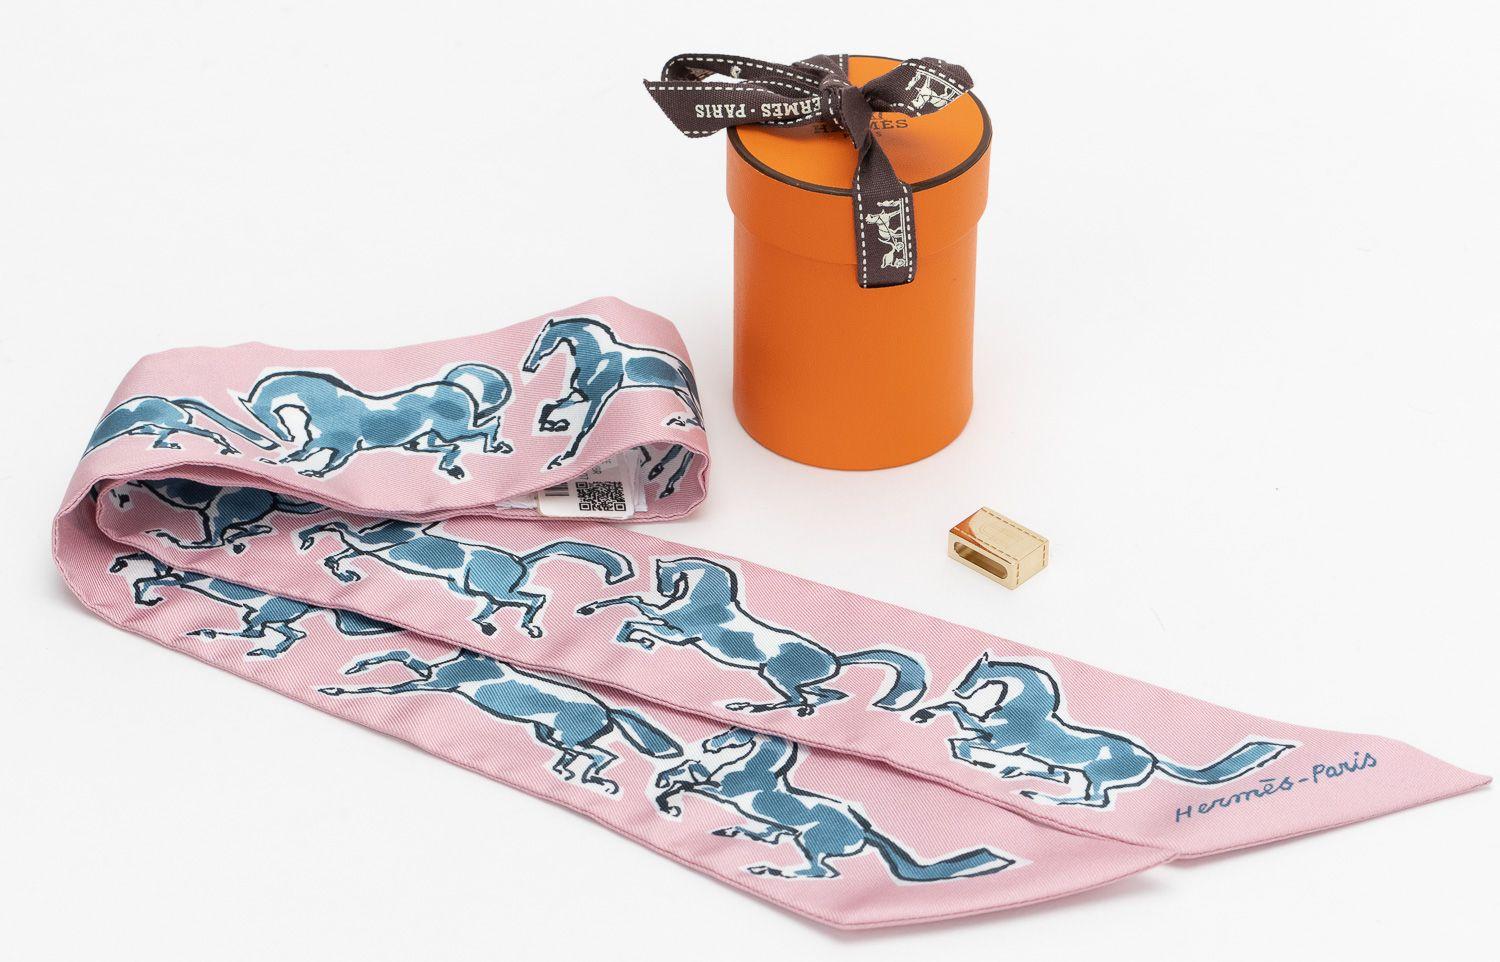 Hermès New Horse Twilly W/Medor Slide In New Condition For Sale In West Hollywood, CA